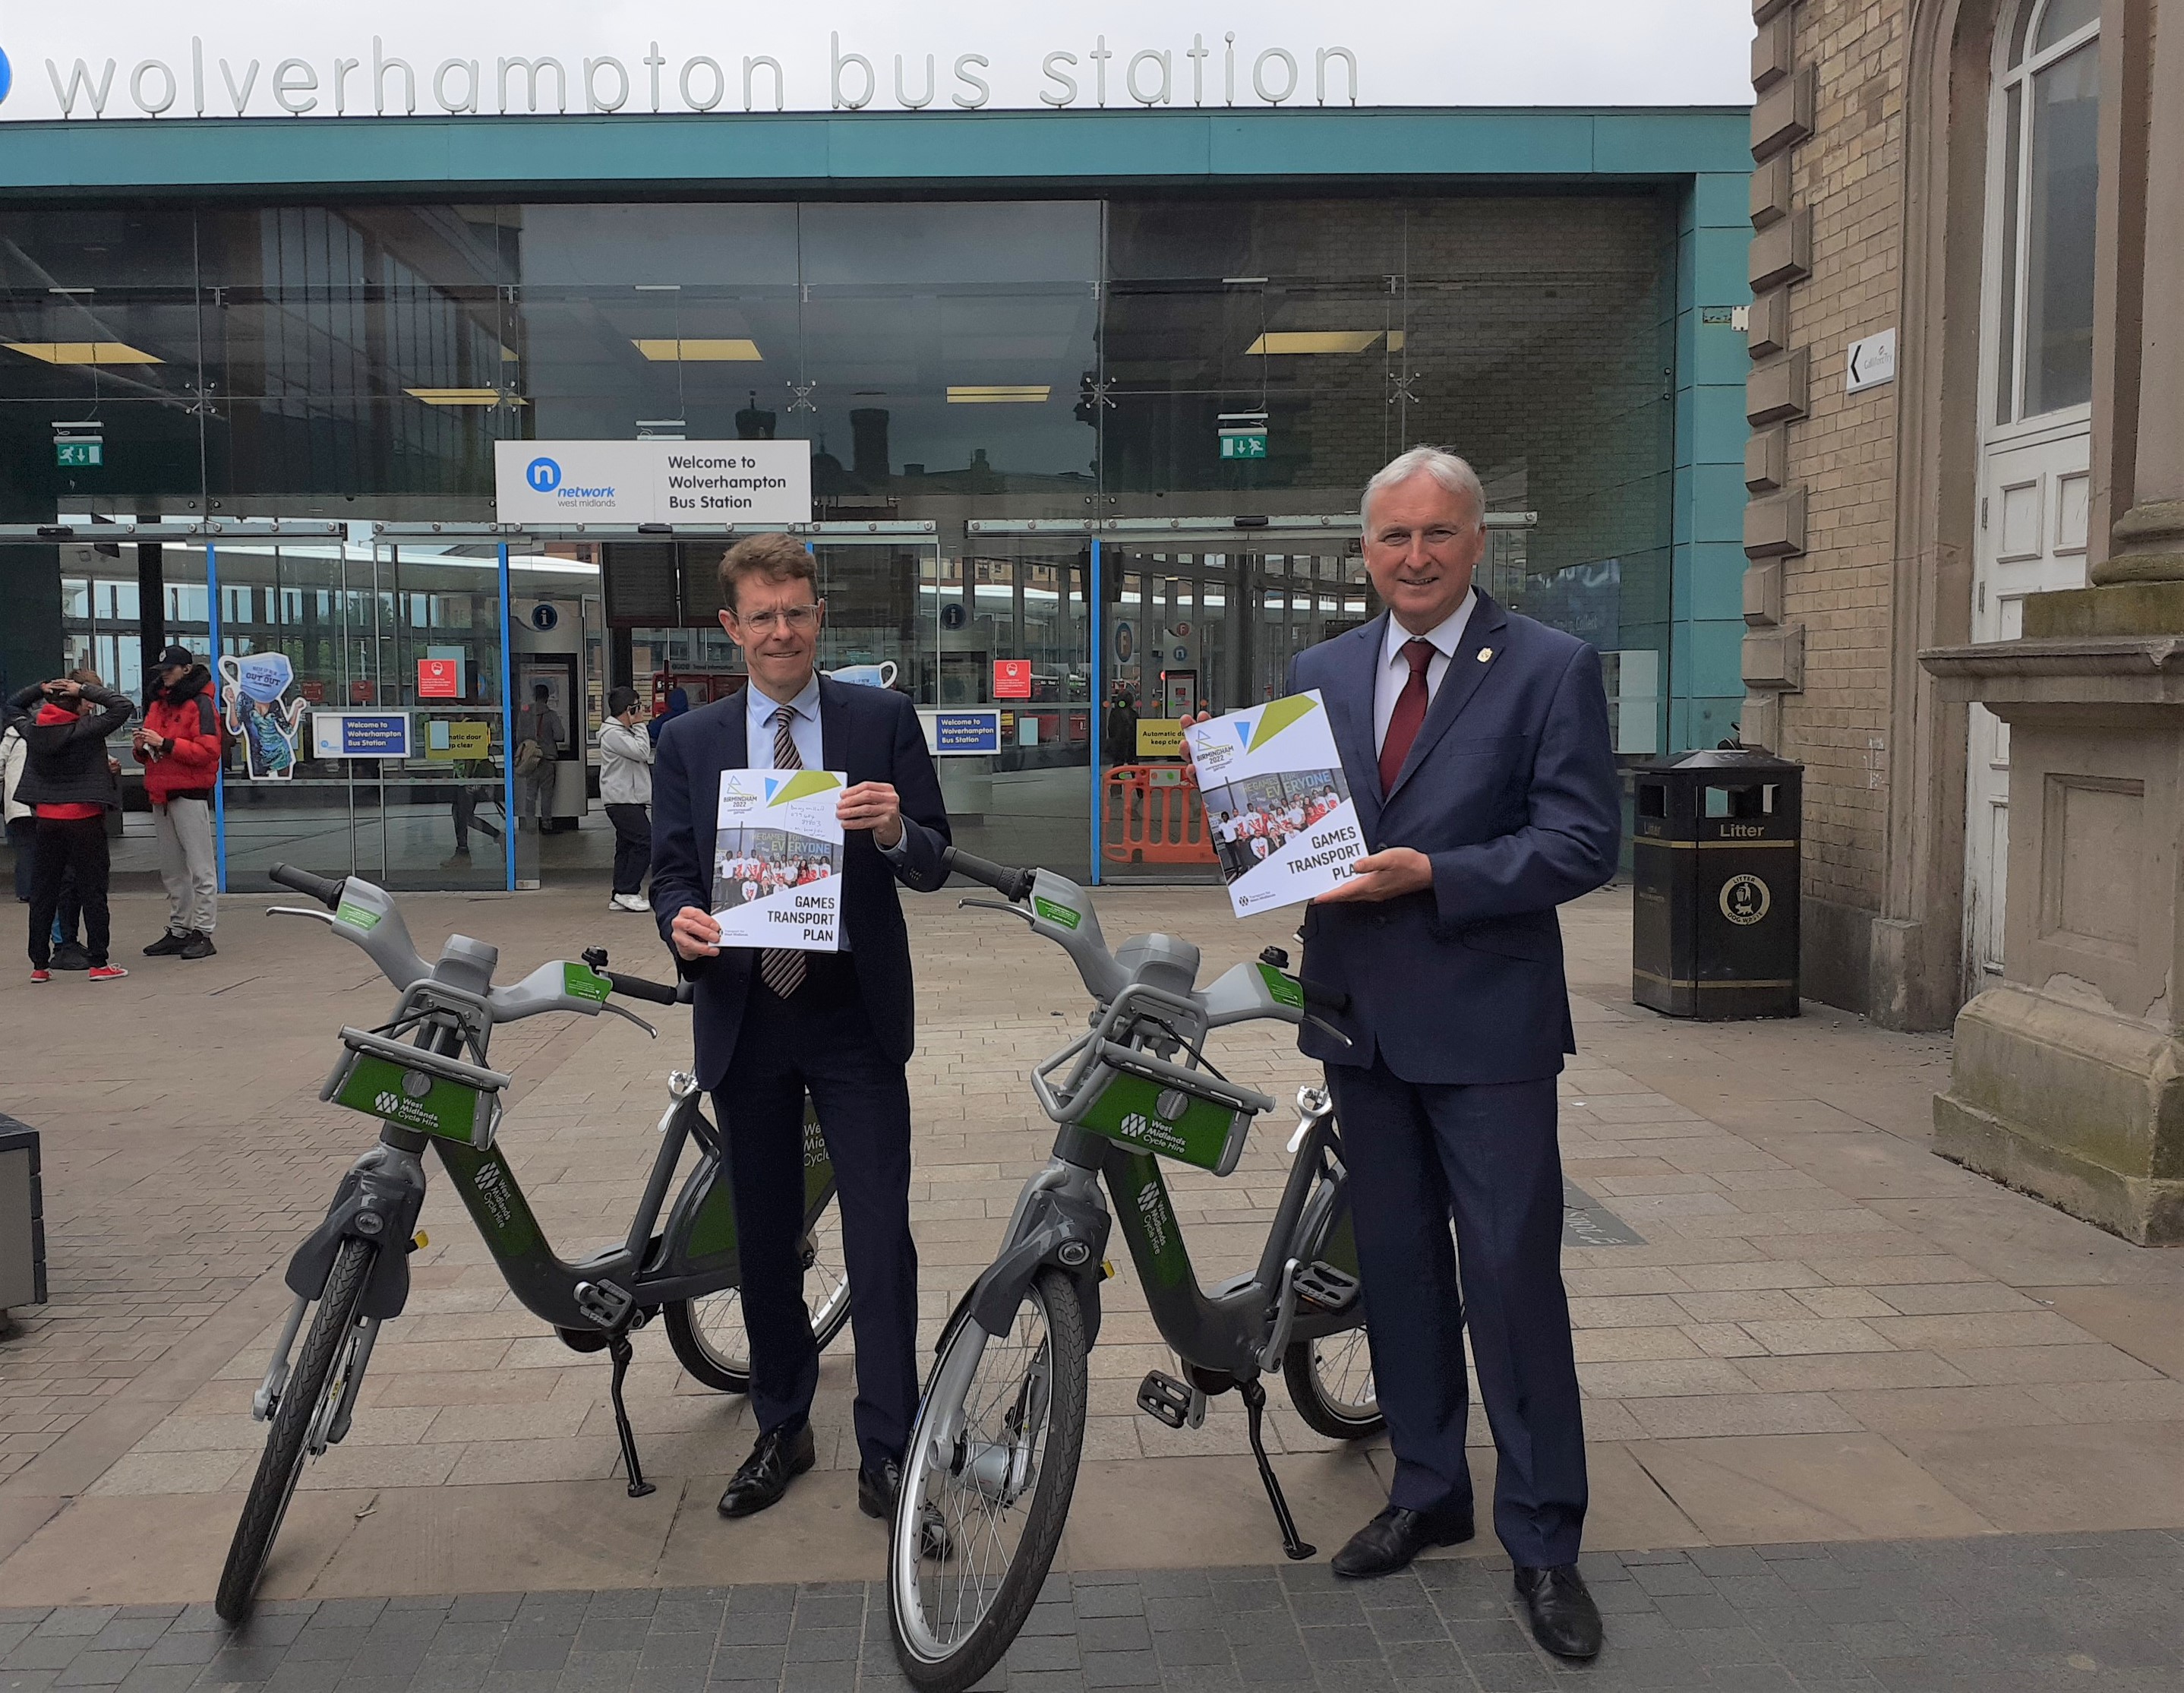 Mayor Andy Street and Cllr Ian Ward with the Commonwealth Games Transport plan promising focus on sustainable public transport